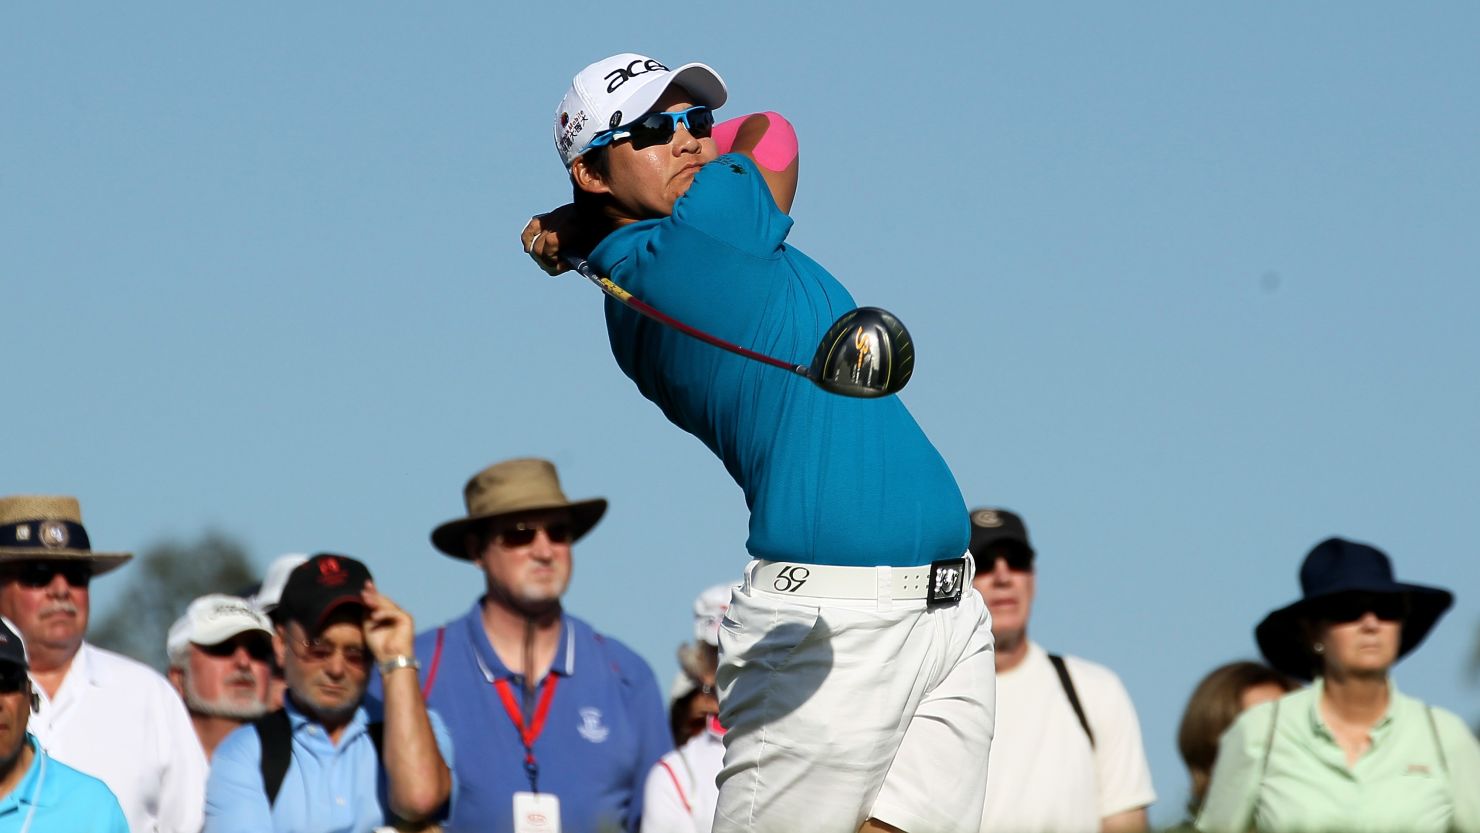 Taiwan's Yani Tseng is clear of the field after two rounds of the Kraft Nabisco Championship in California